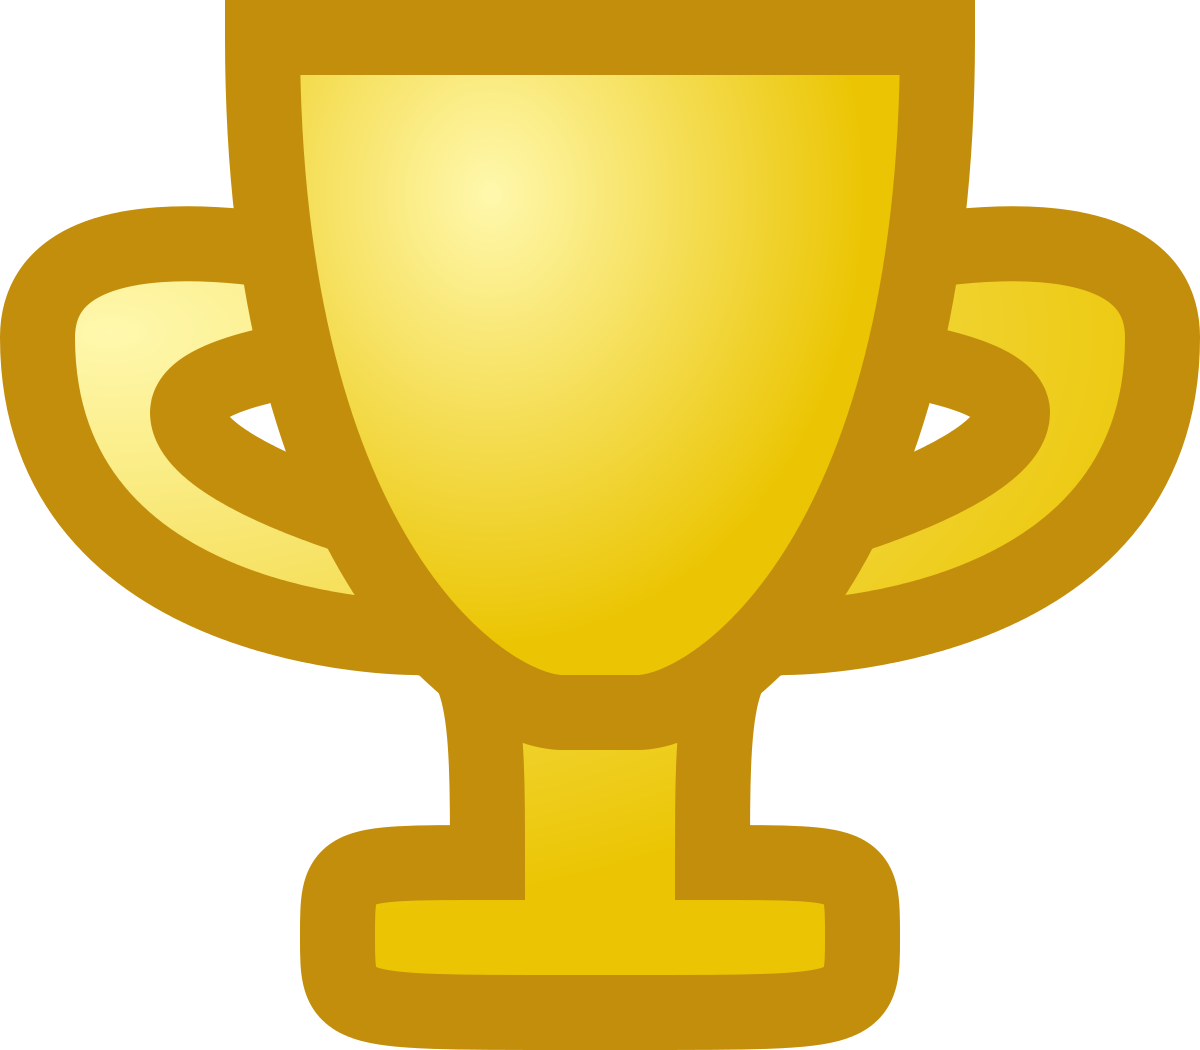 Golden Champion Cup Free Photo PNG Image